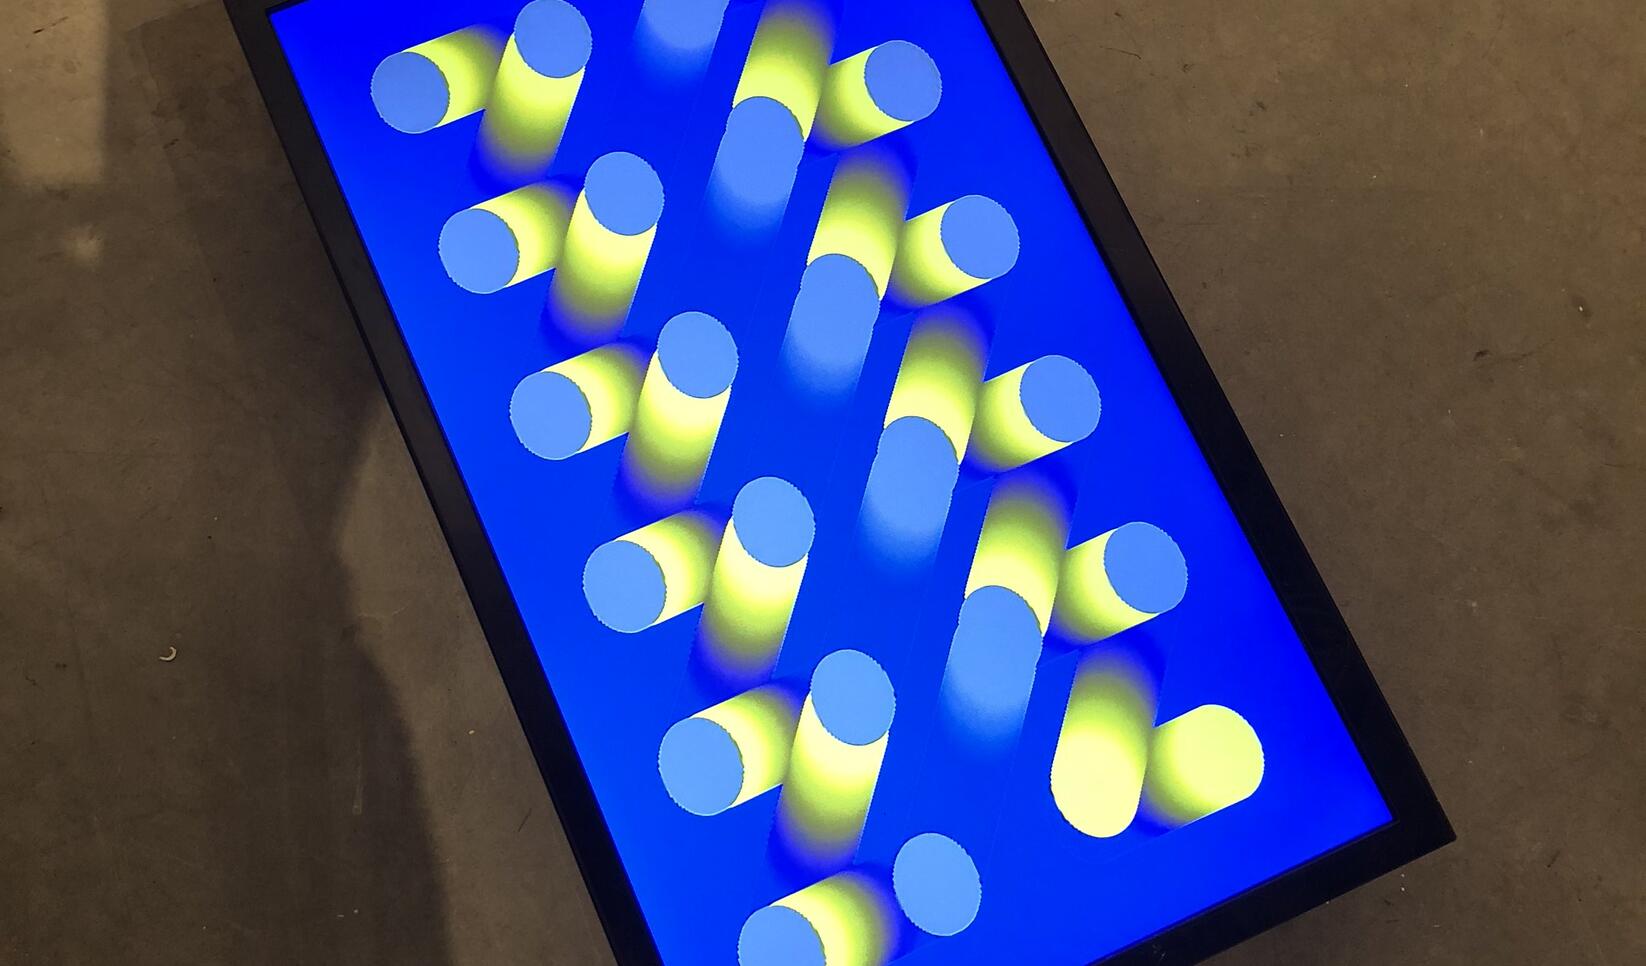 Image on a tablet of geometric shapes and fluorescent blues and yellows ; Yujie Cao